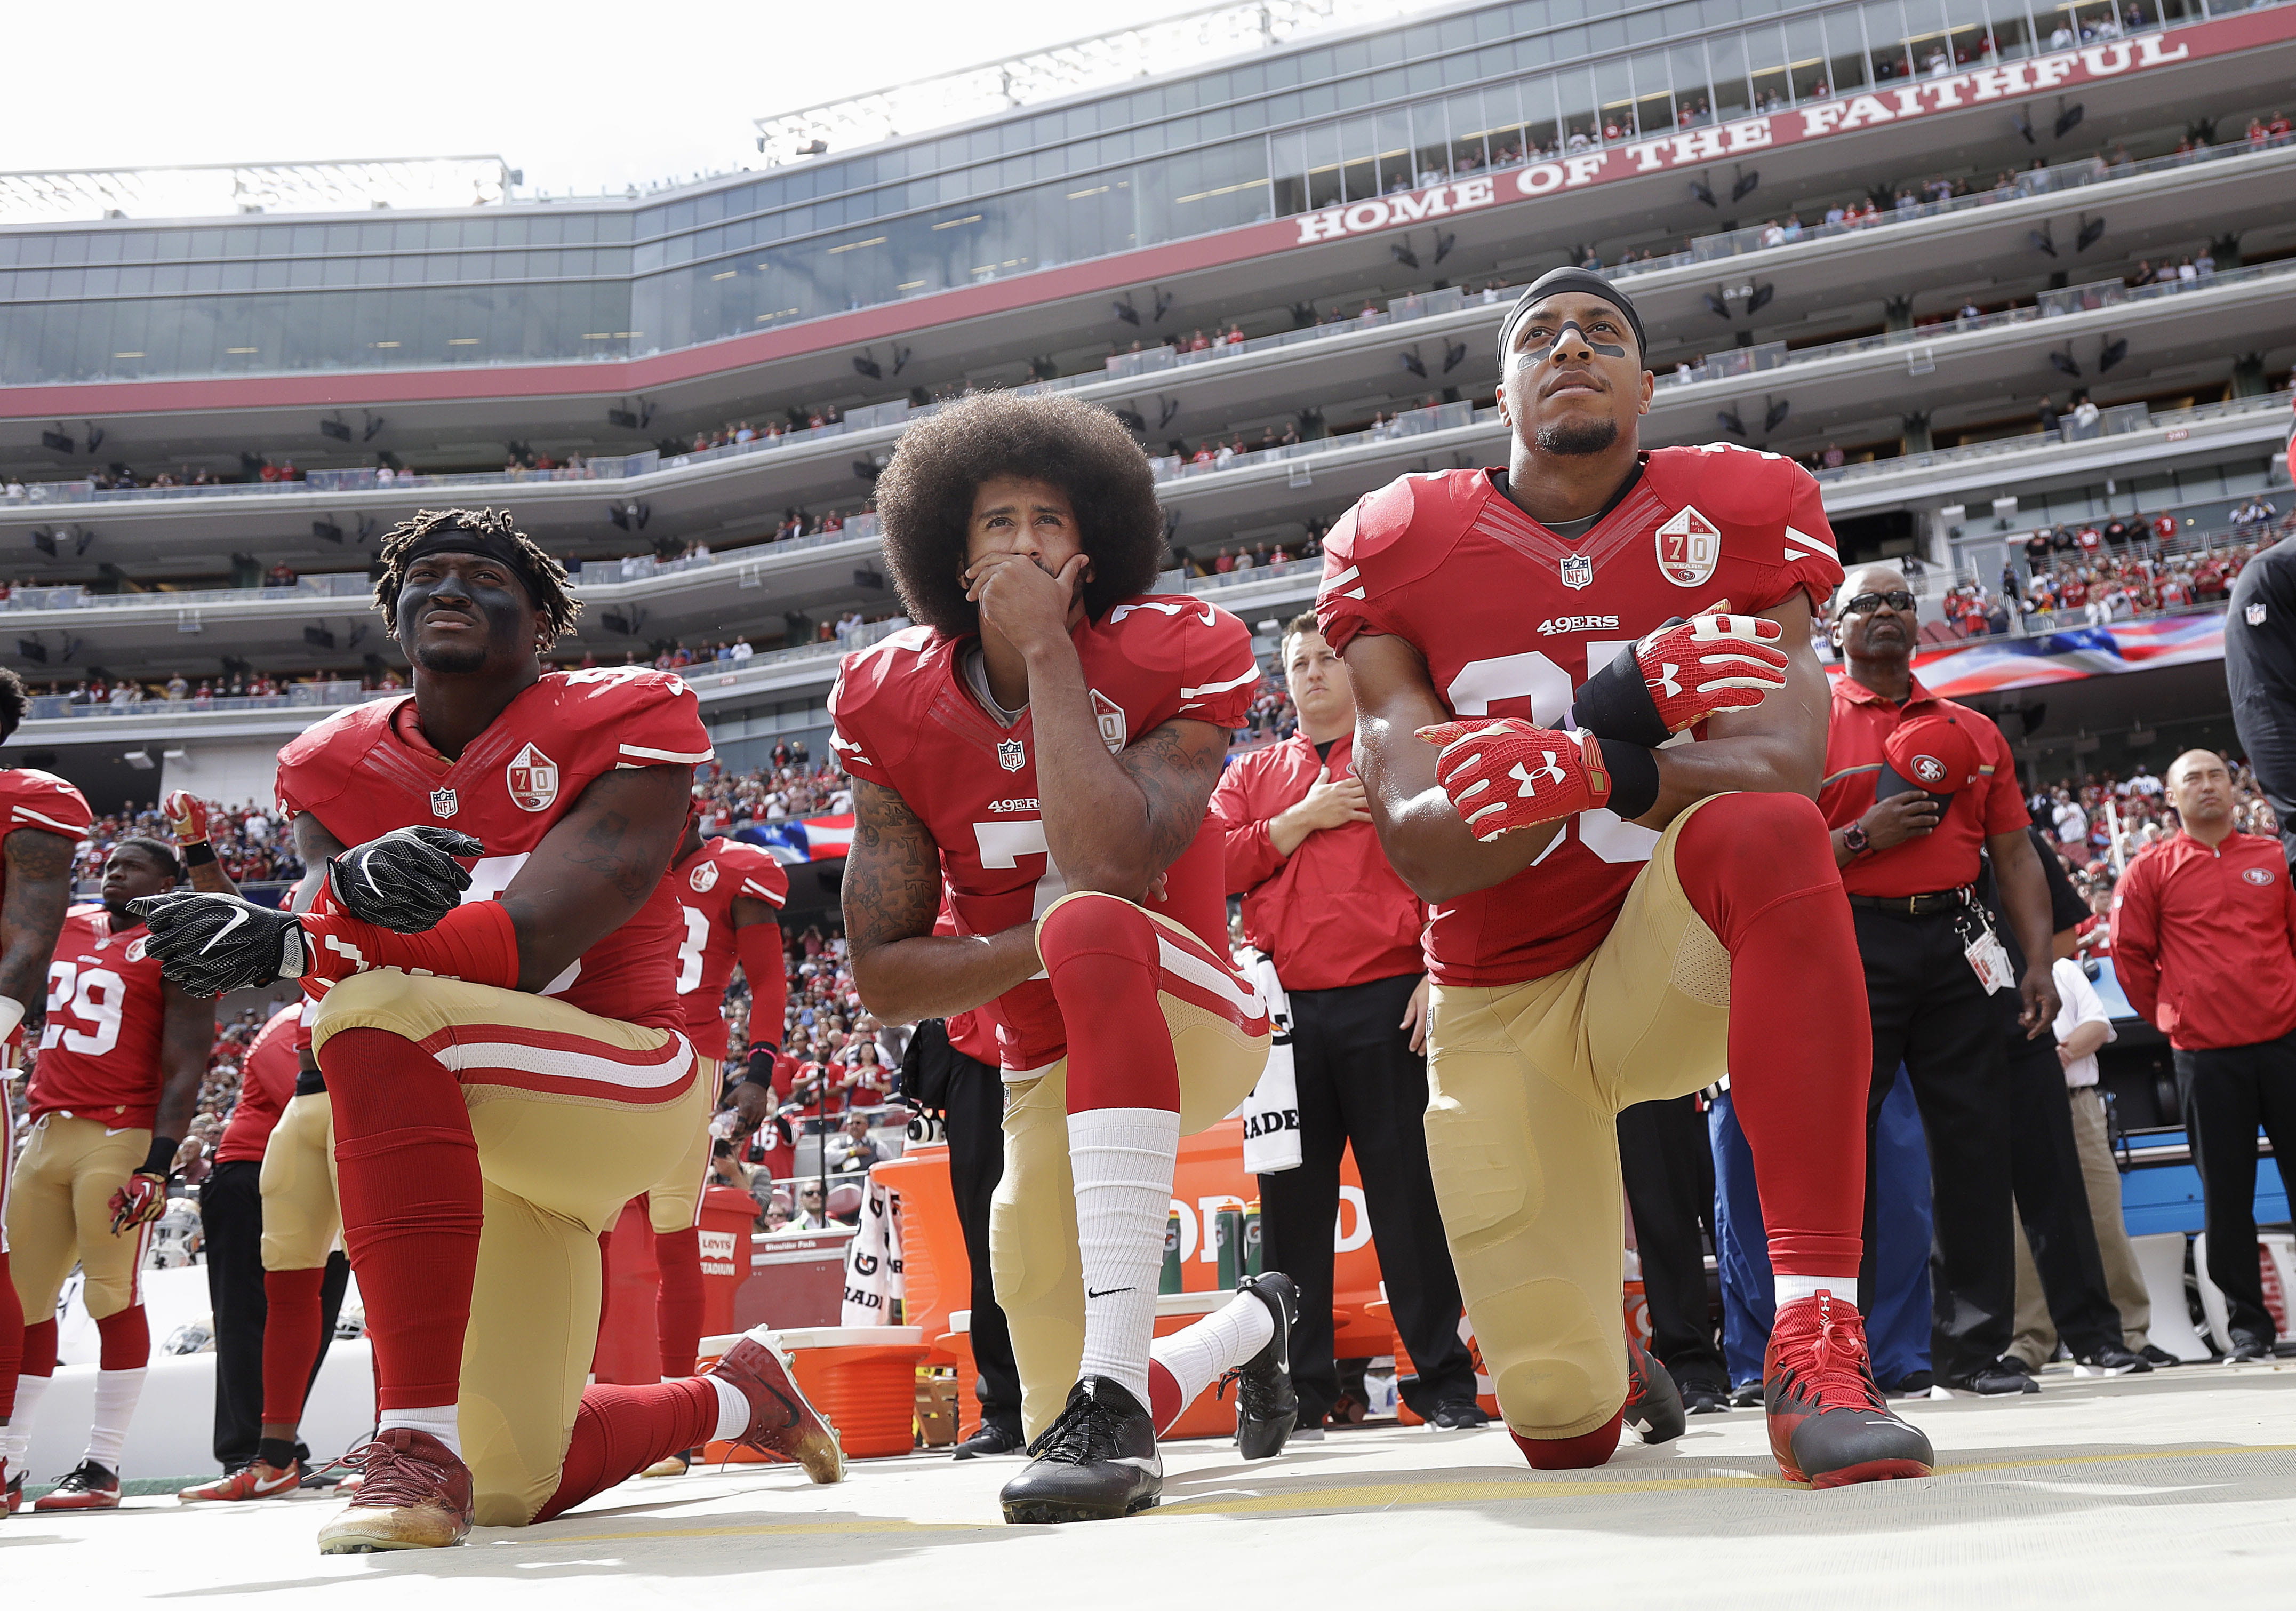 San Francisco 49ers teammates (from left) Eli Harold, Colin Kaepernick and Eric Reid kneel during the national anthem before a game against the Dallas Cowboys in October 2016.